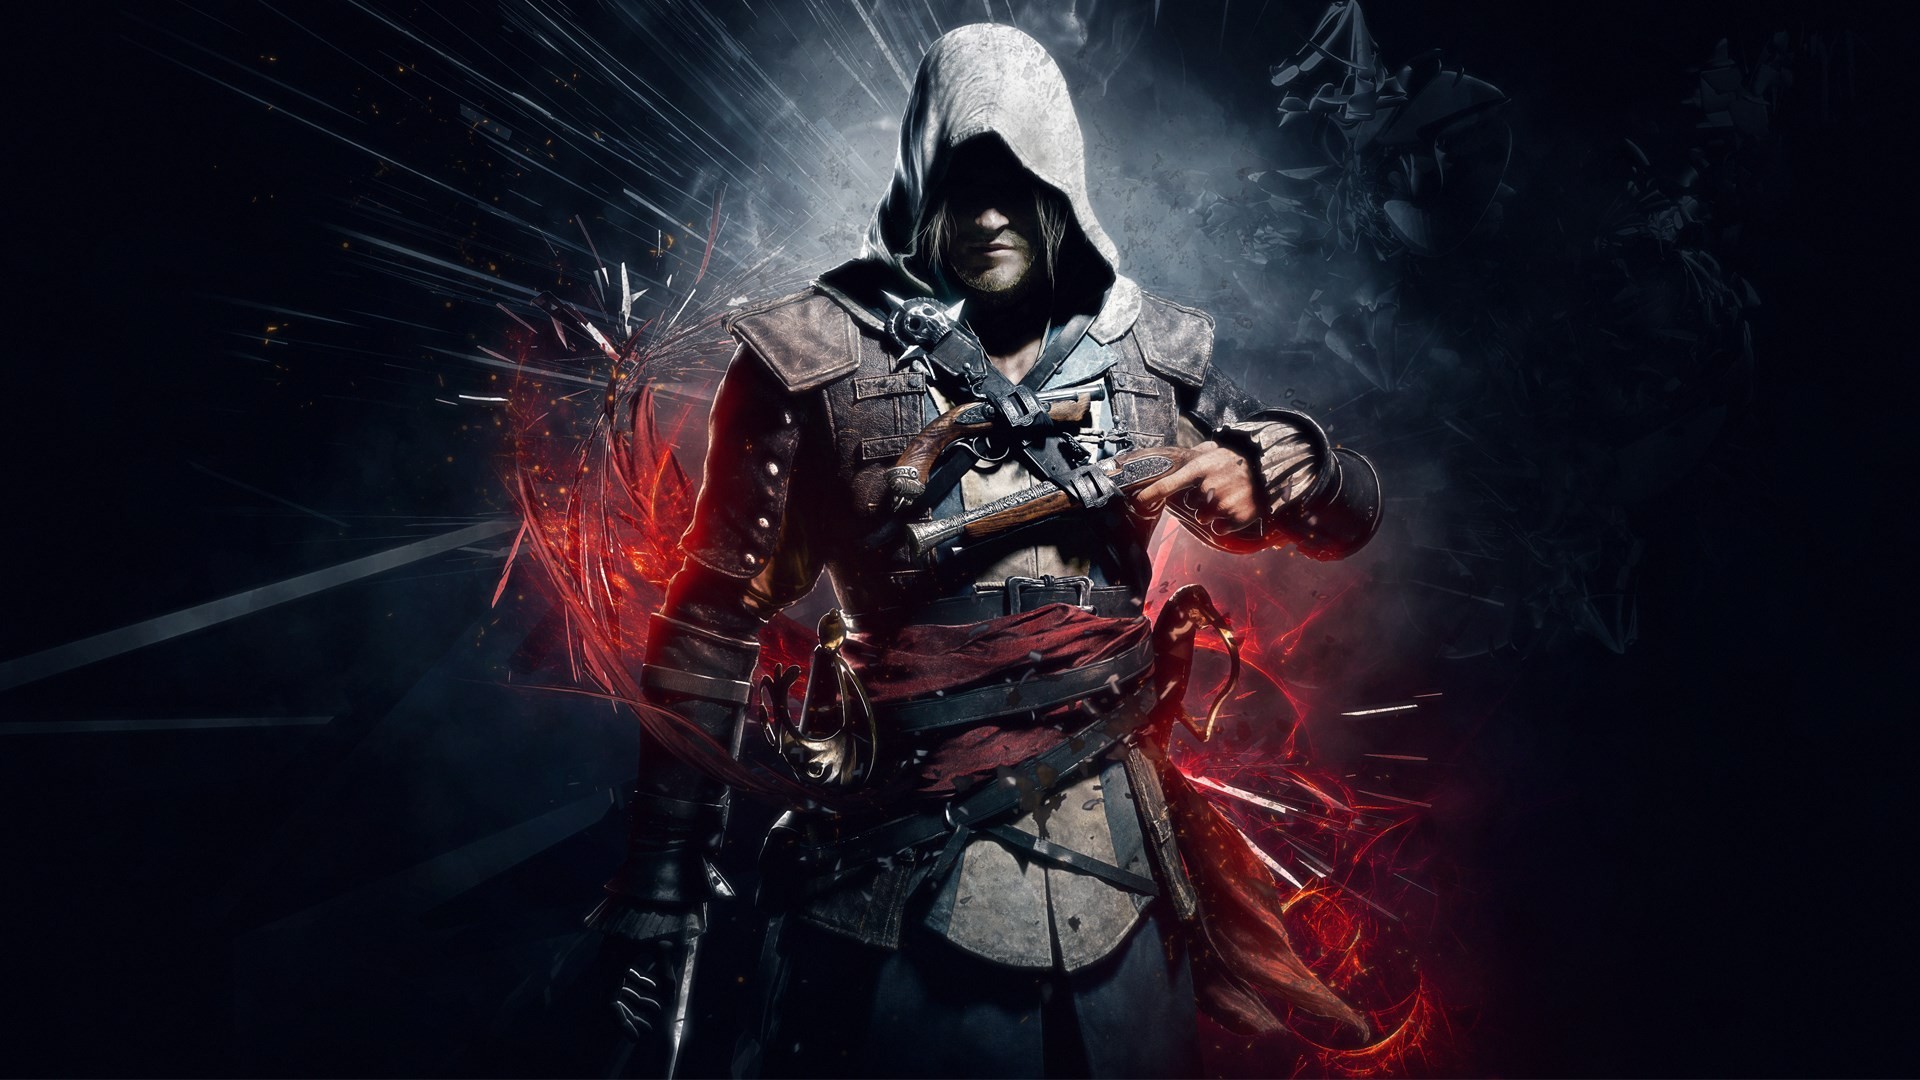 General 1920x1080 Edward Kenway Assassin's Creed video games video game men fantasy men gun video game art hoods